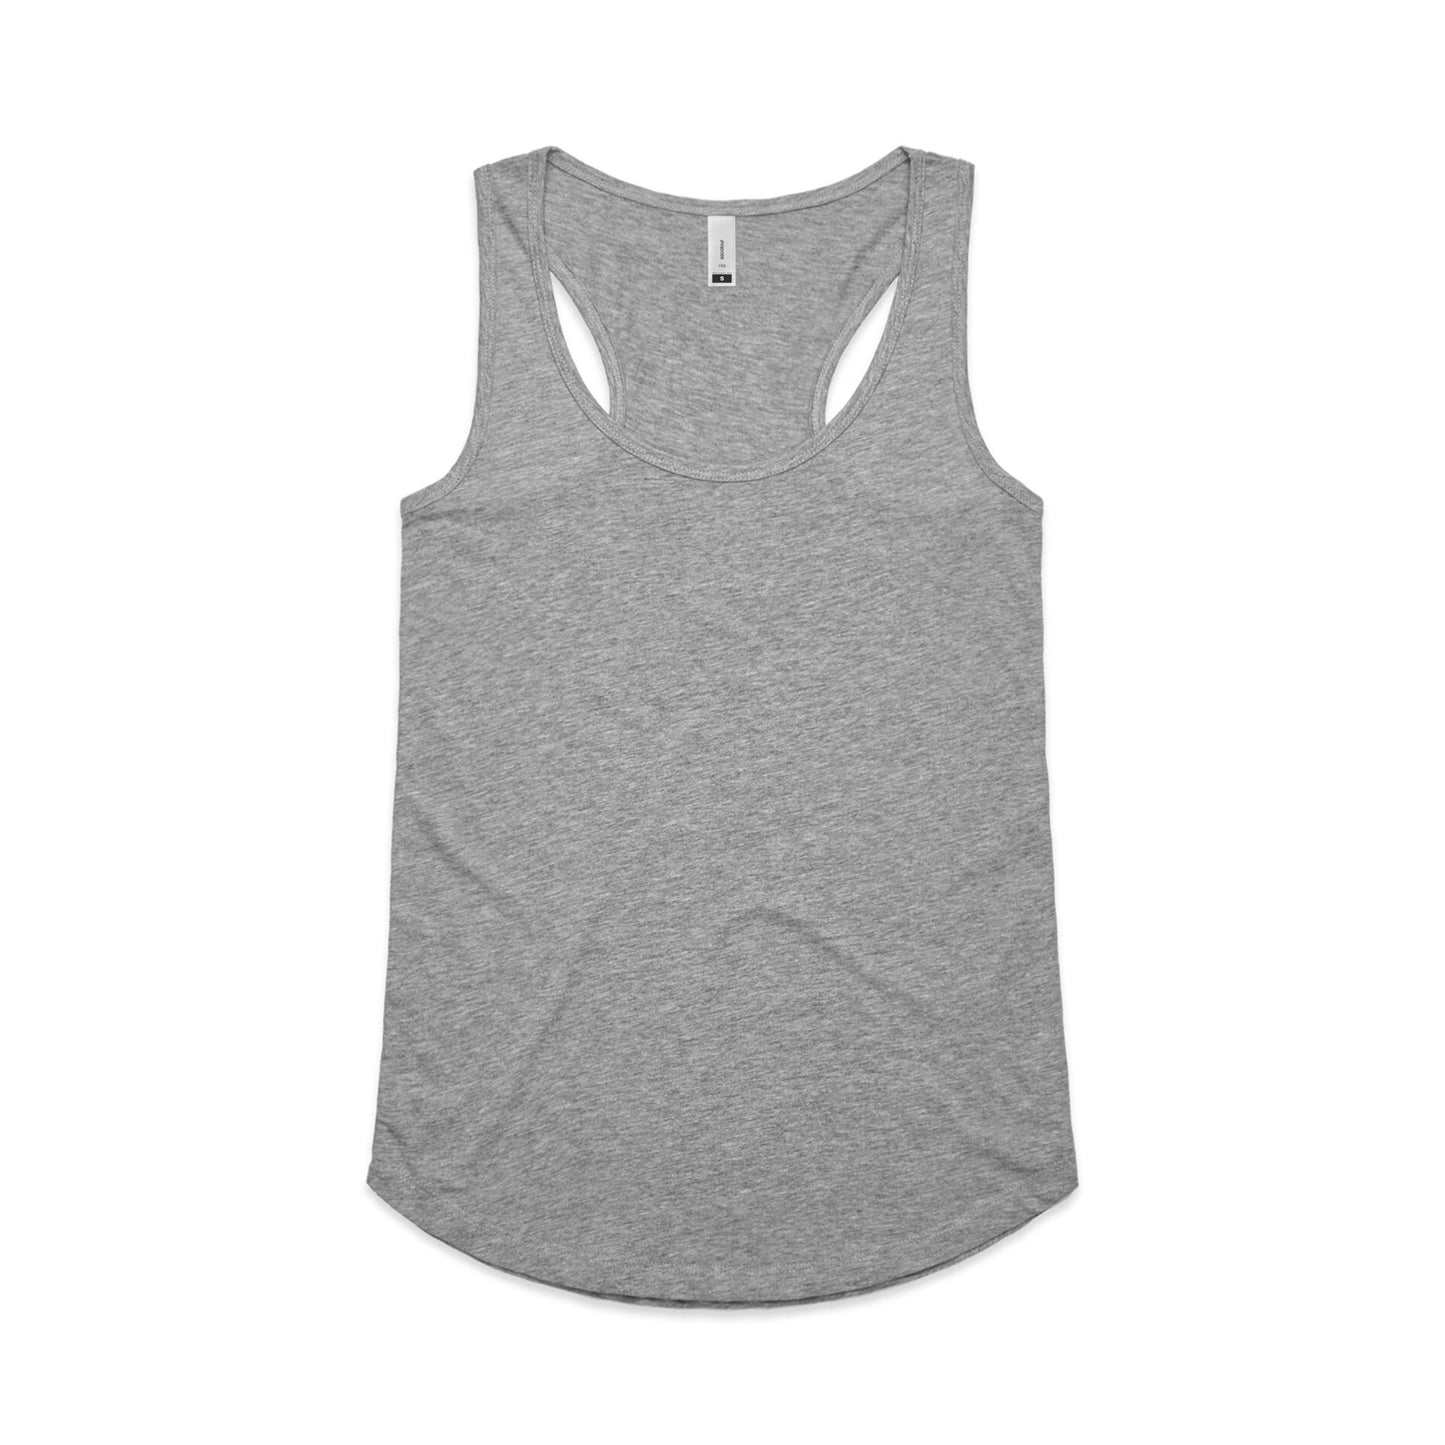 Womens Yes Racerback Singlet | 3 Colours